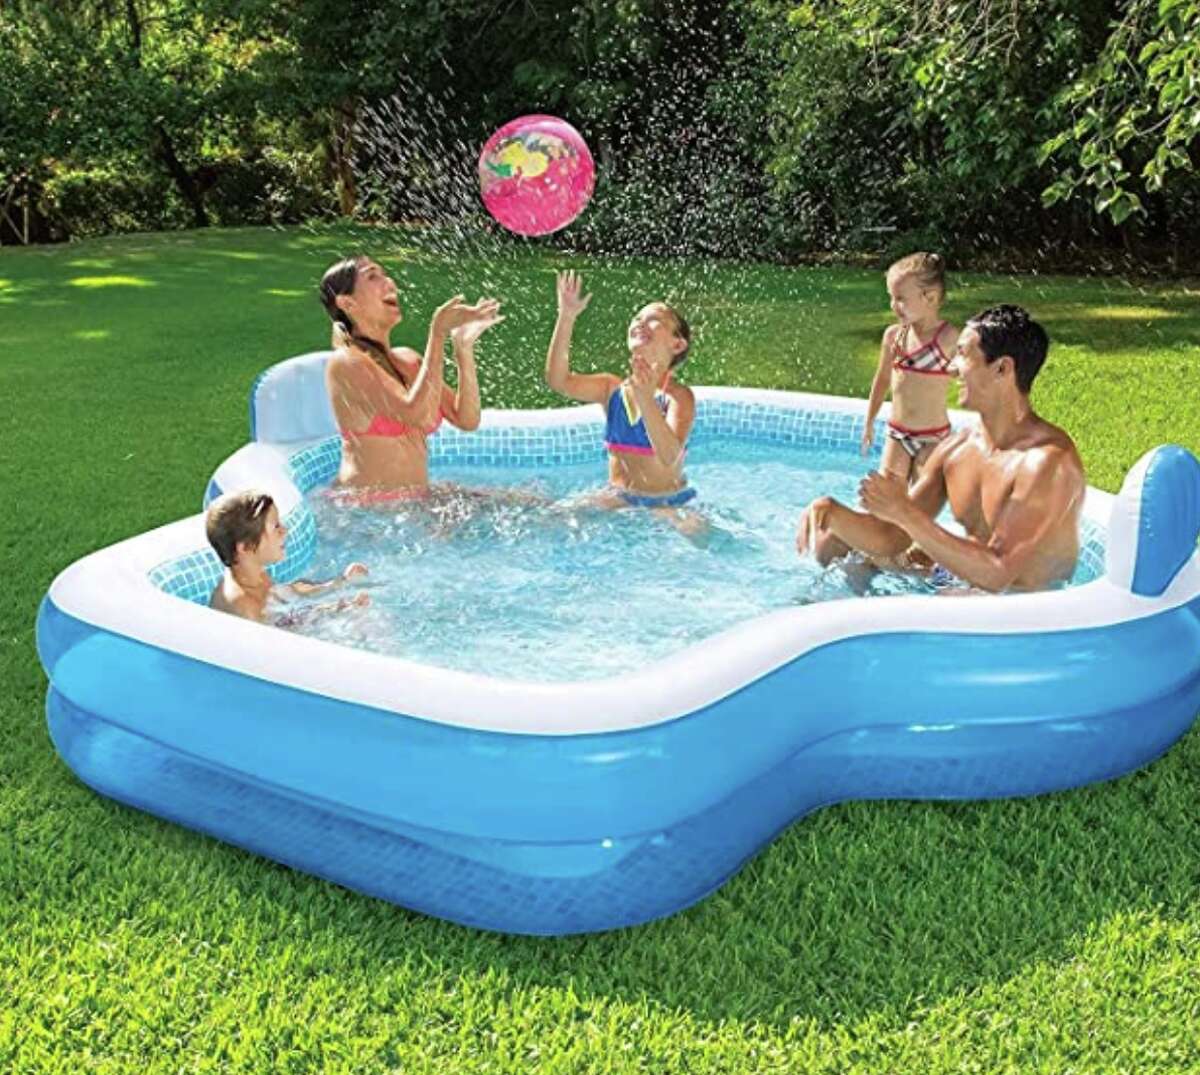 That Viral TikTok Inflatable Pool Back in Stock: This inflatable pool went viral on TikTok and sold out but it's now back in stock and just in time for summer. Grab this blow up swimming pool before it's gone.